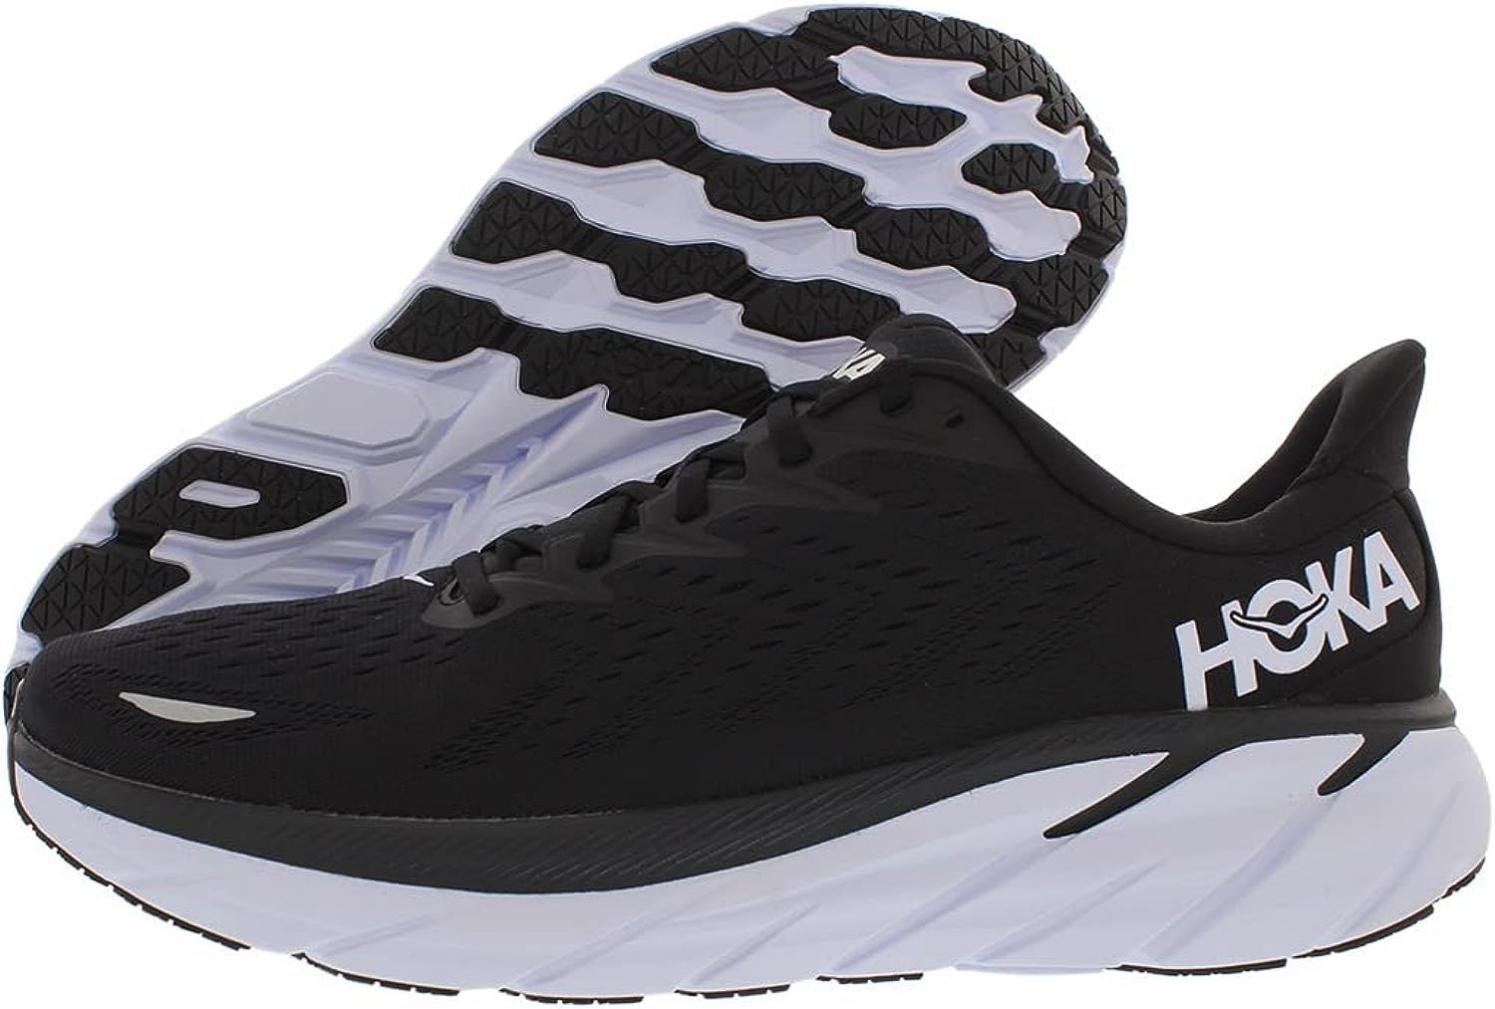 HOKA ONE ONE Clifton 8 Mens Shoes Size 10.5, Color: Black/White